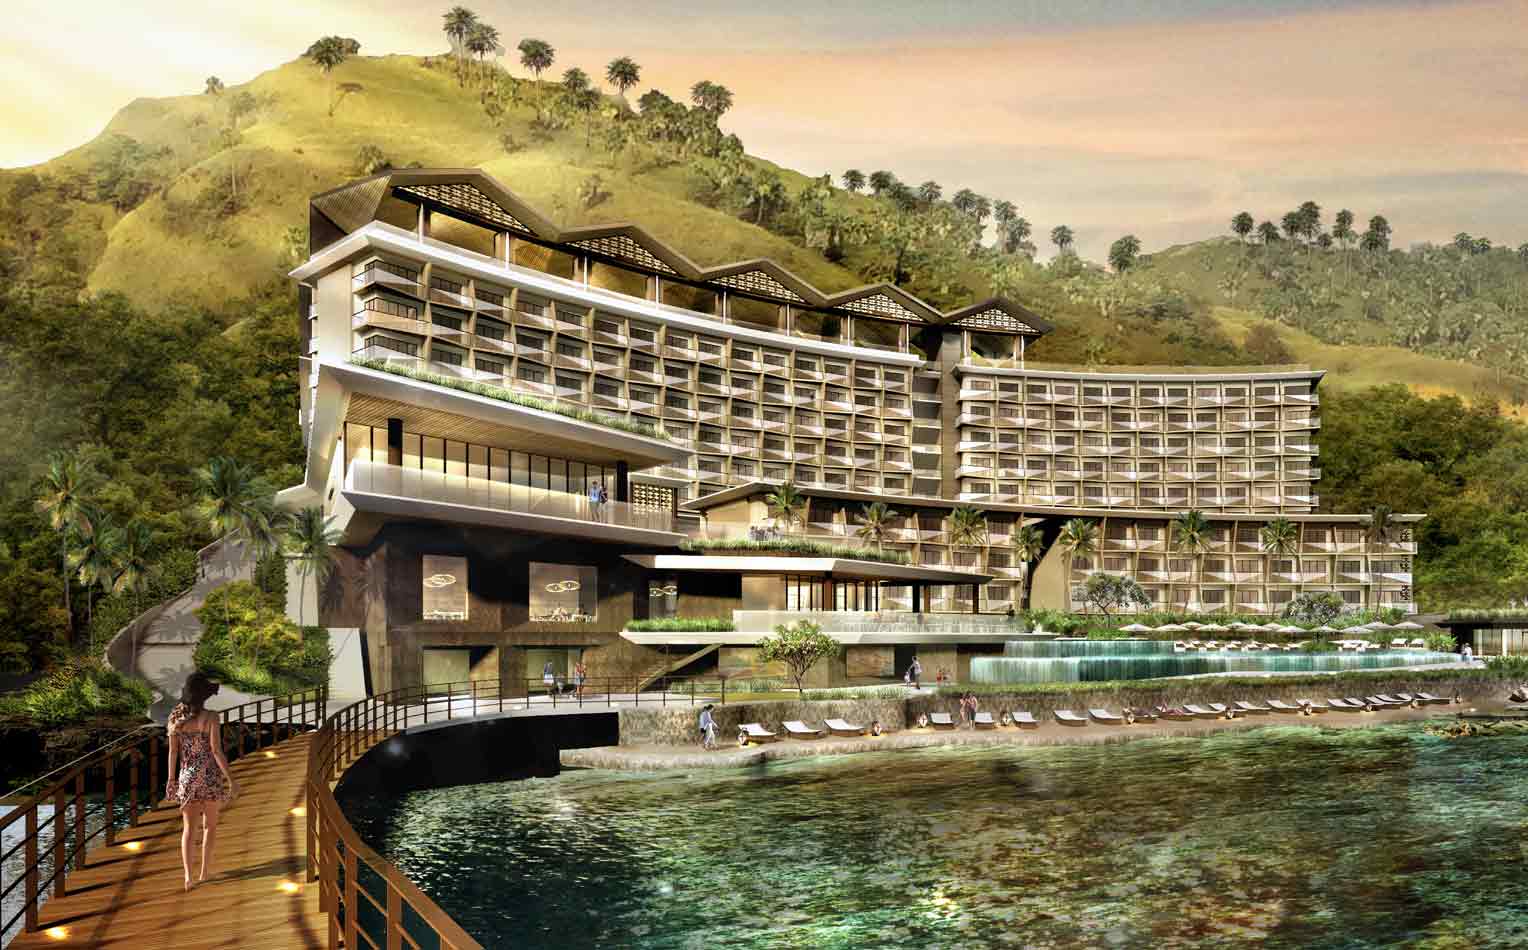 AYANA Resort to Launch the First and Only Five-Star Hotel in Komodo